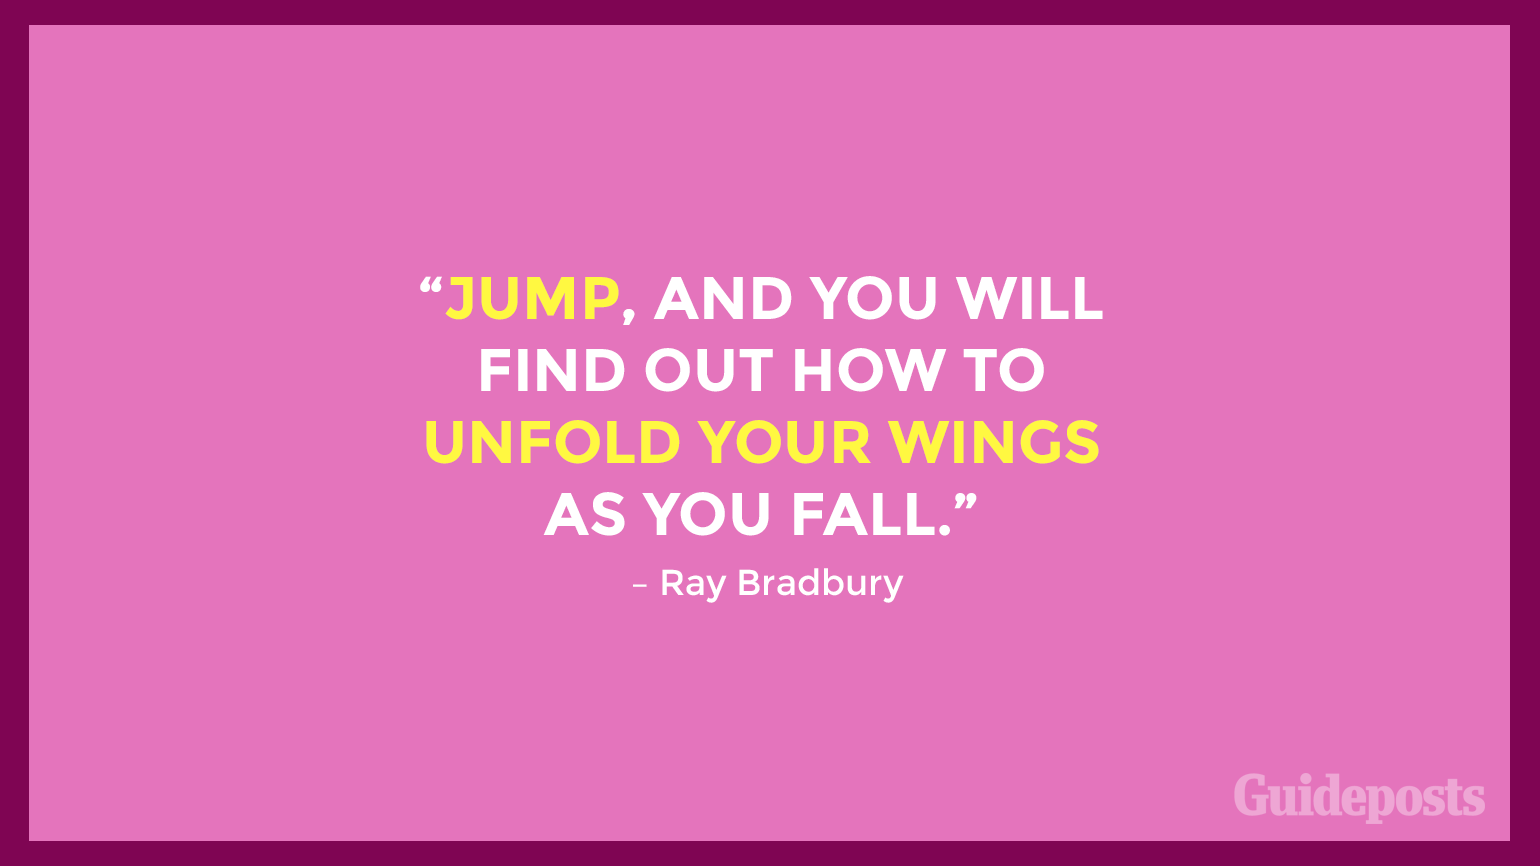 “Jump, and you will find out how to unfold your wings as you fall.” – Ray Bradbury